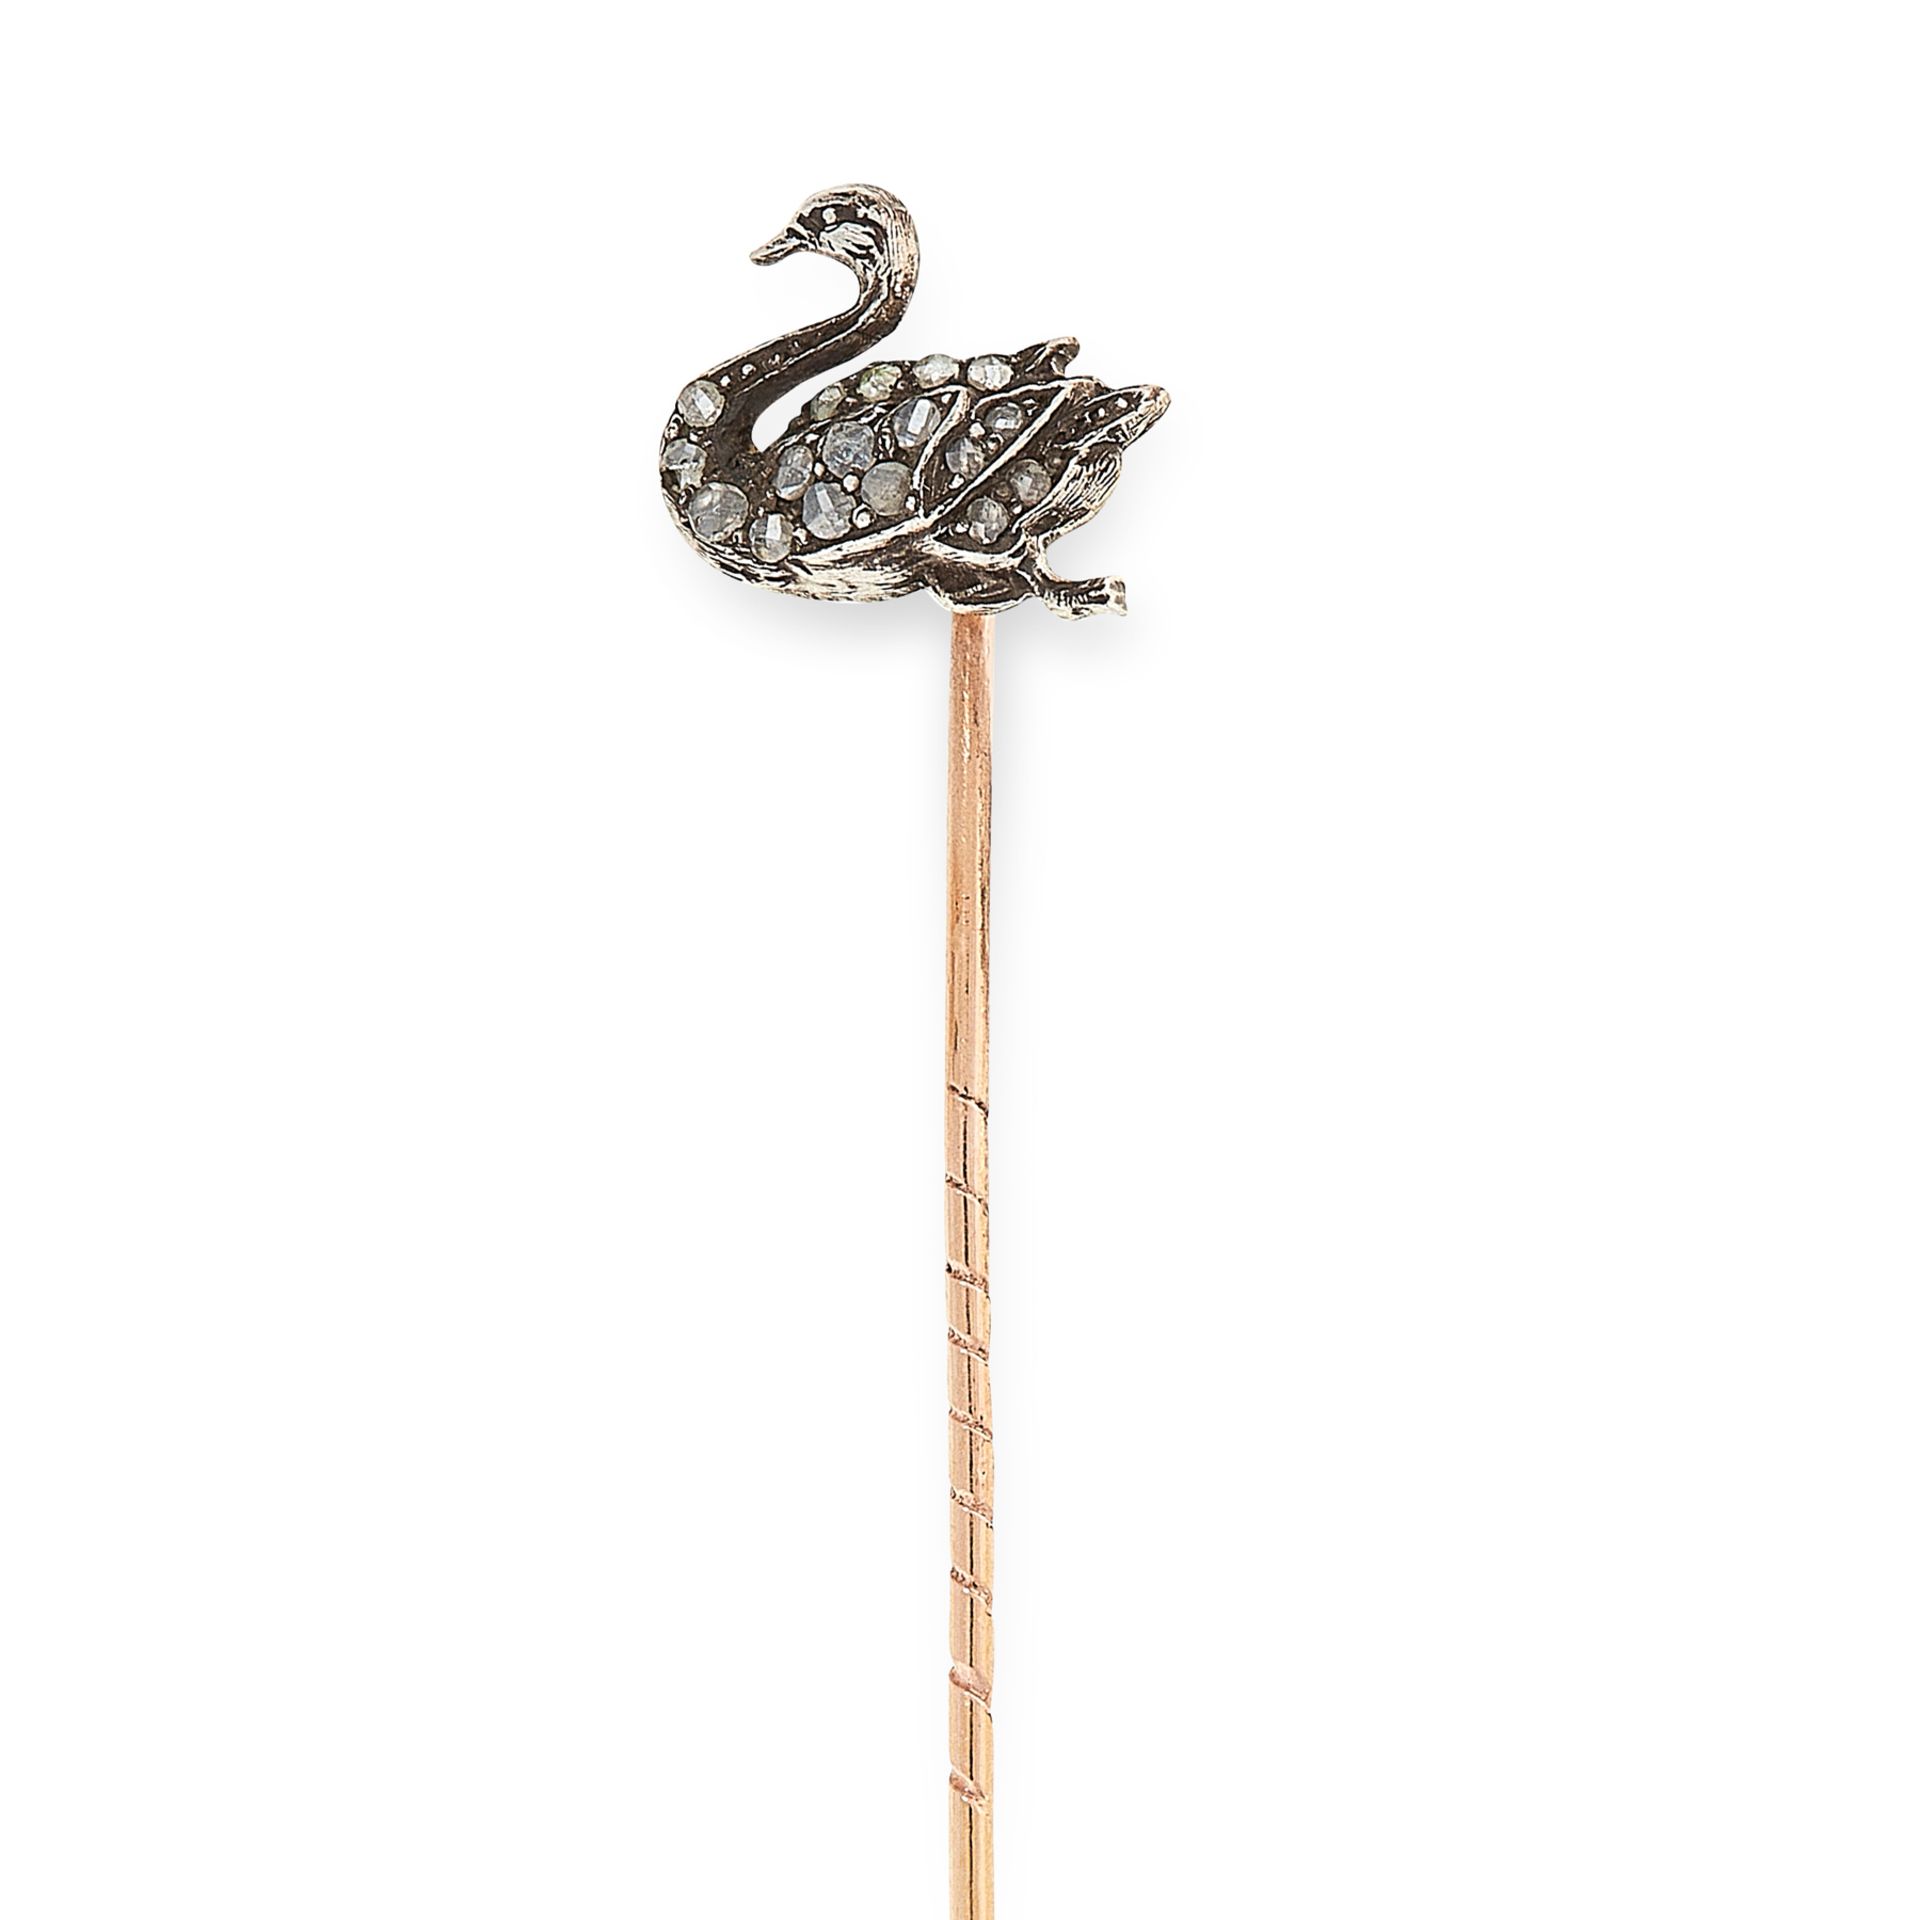 AN ANTIQUE DIAMOND SWAN TIE / STICK PIN in yellow gold and silver, the pin surmounted by a swan, its